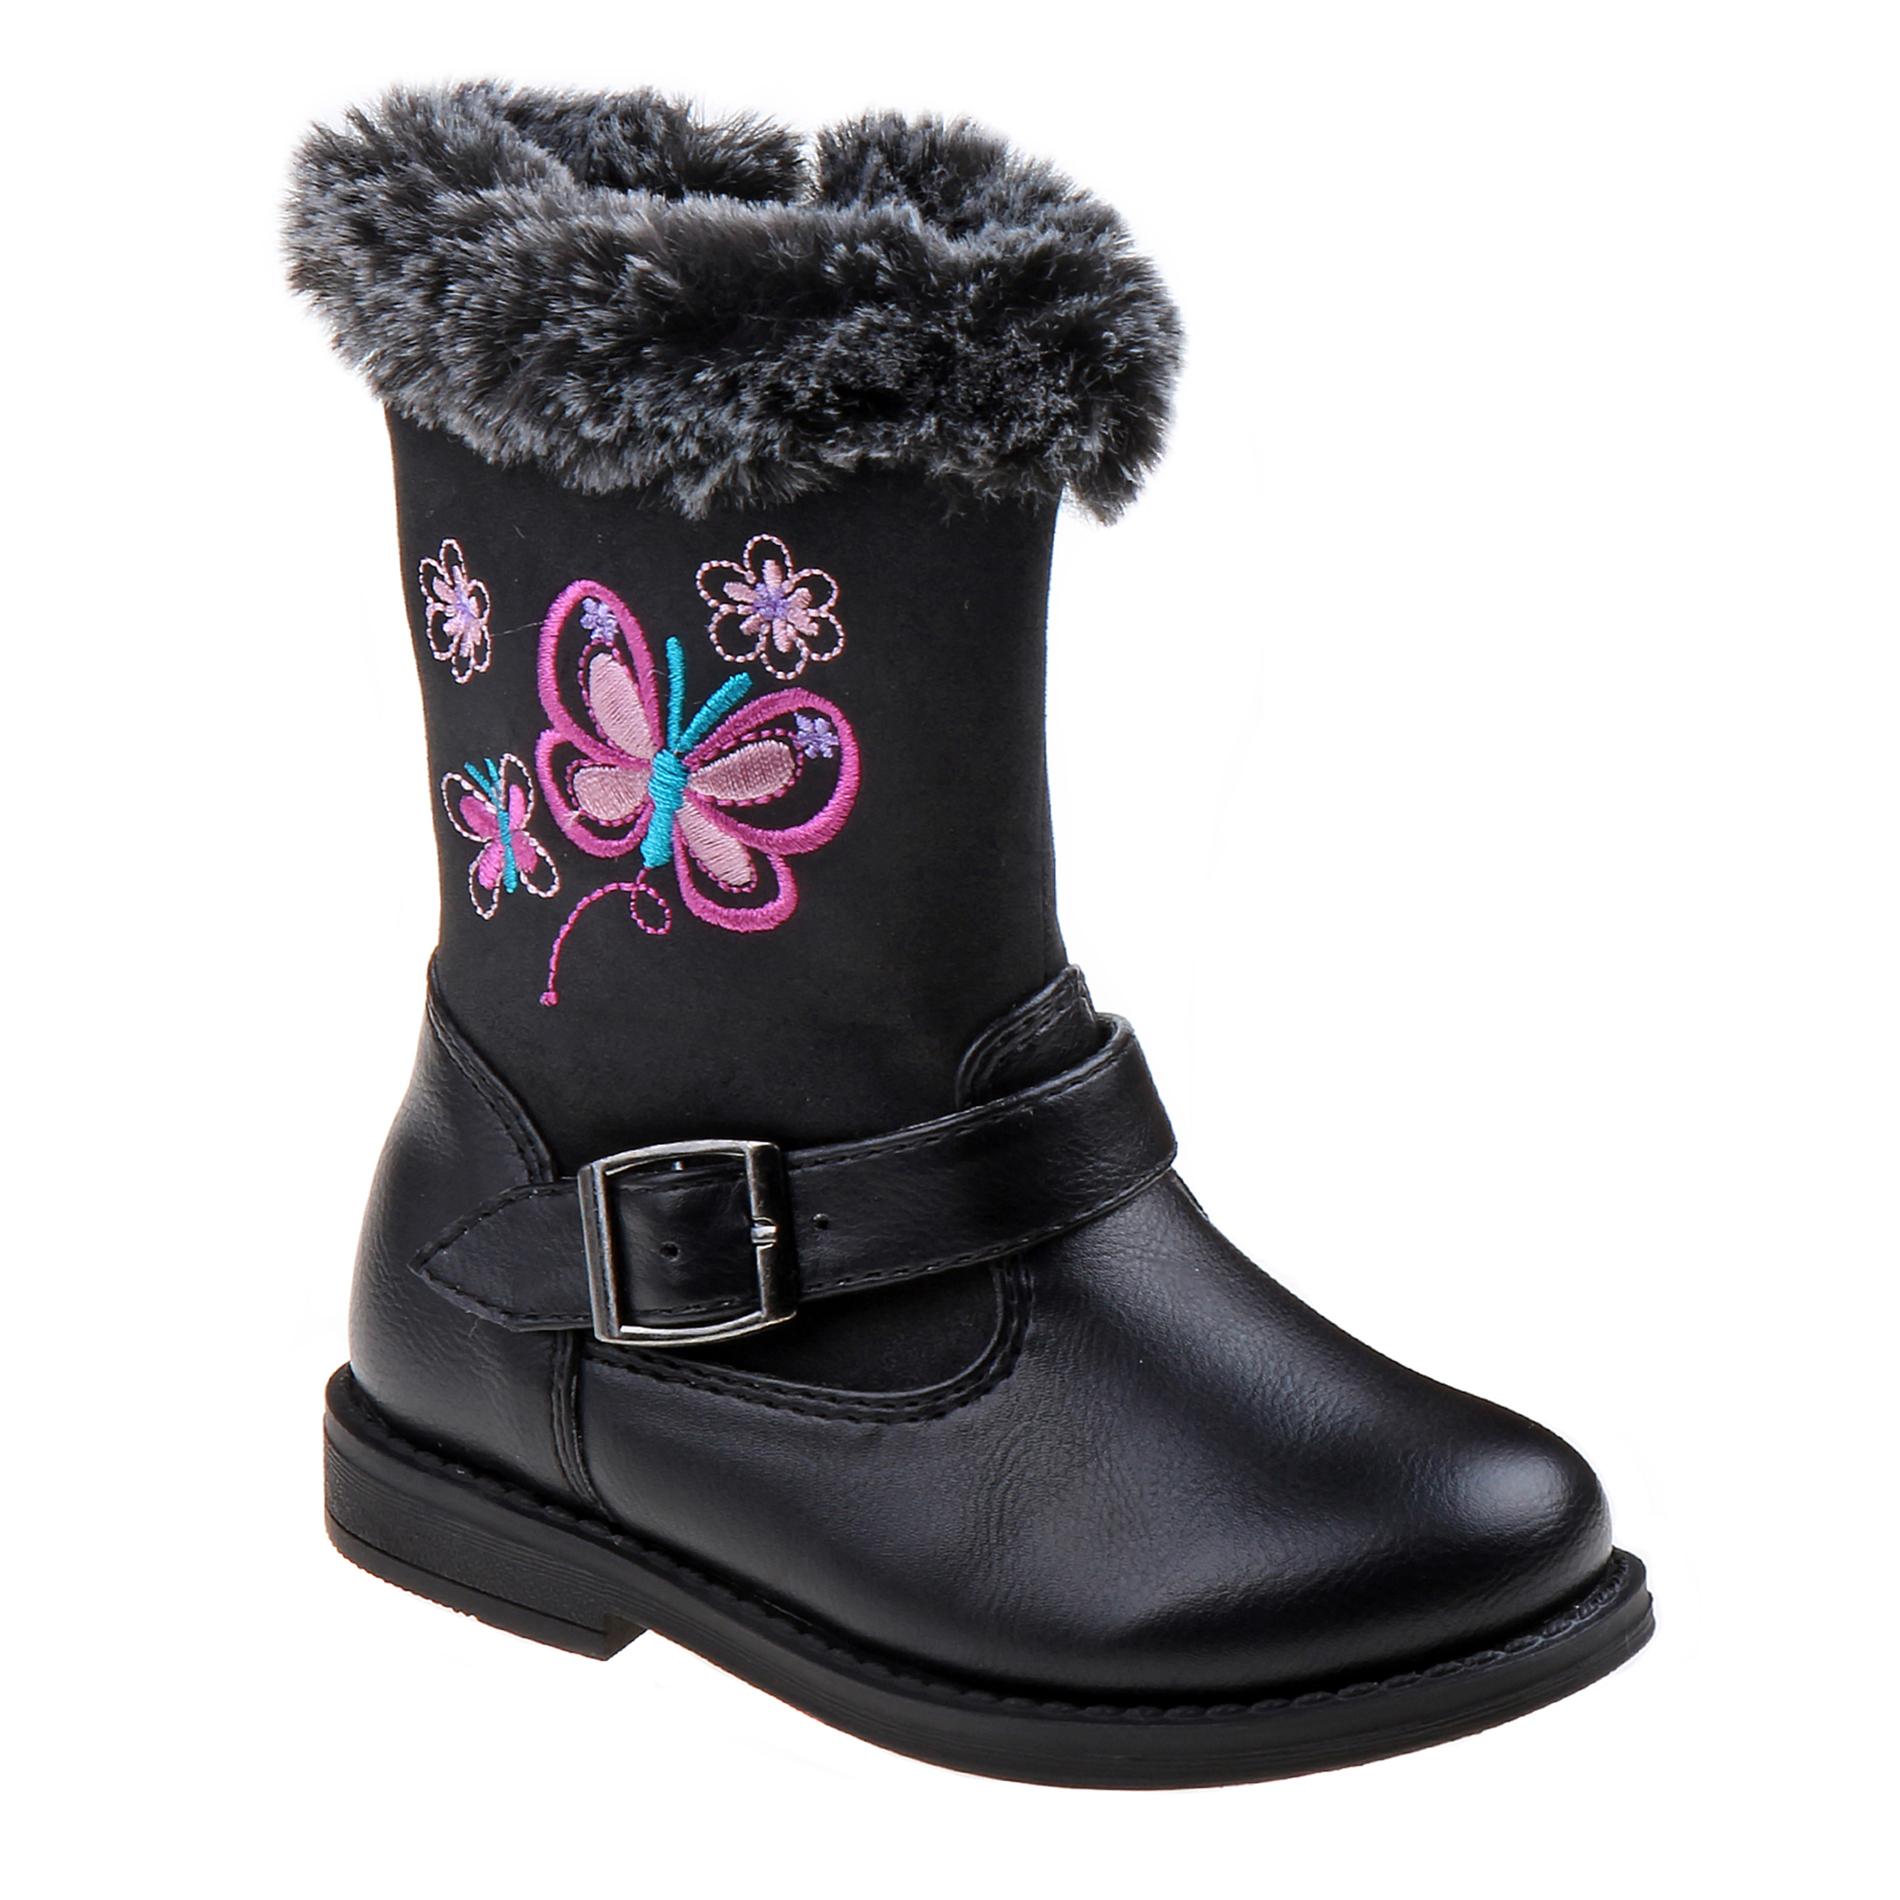 Laura Ashley Toddler Girls' Fashion Boot - Black/Butterfly